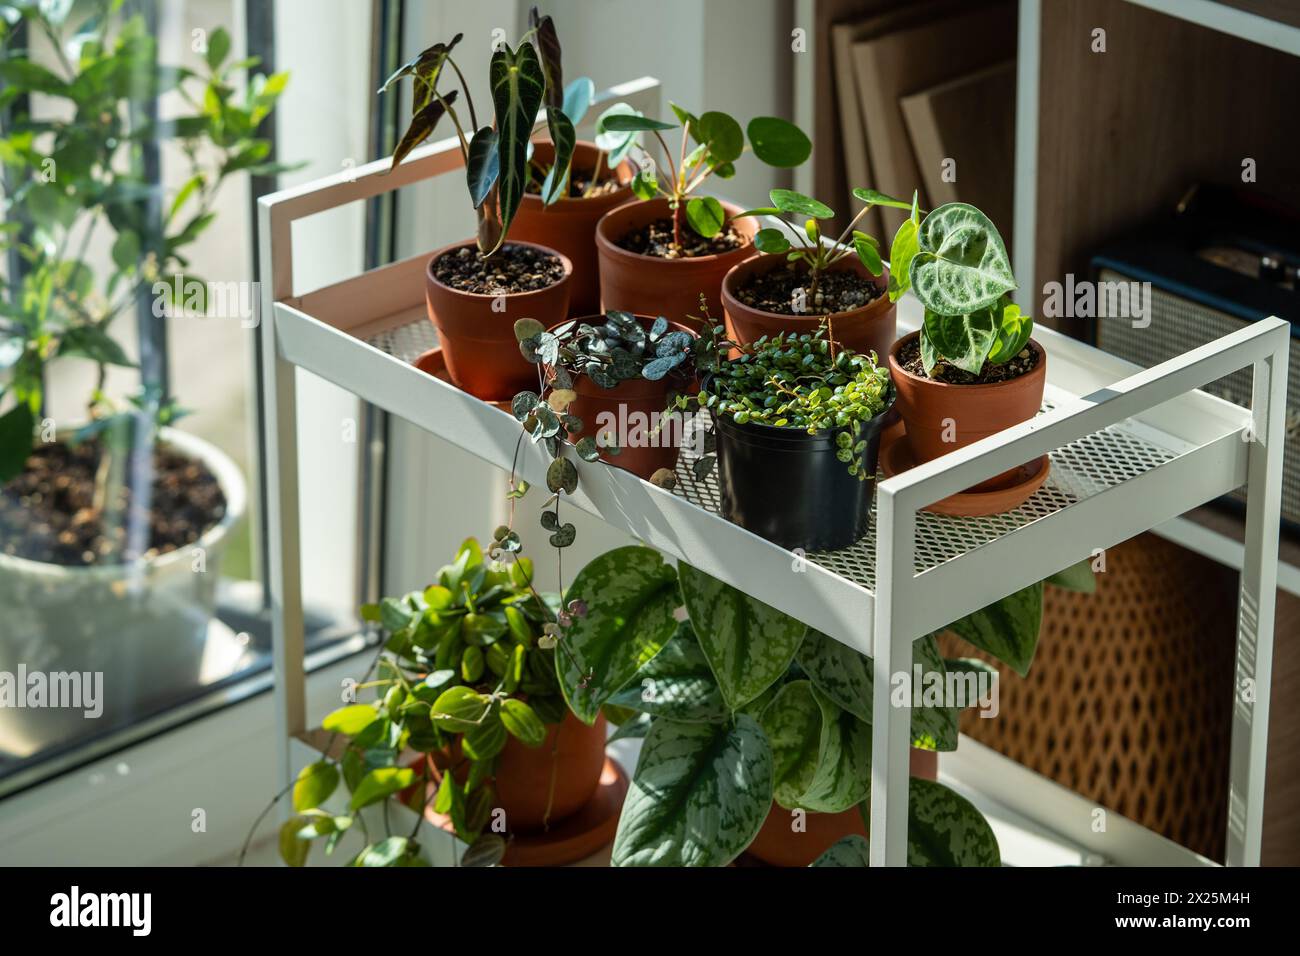 Sprouts potted plant on cart at home. Houseplants - Pilea peperomioides, Alocasia Bambino, Anthurium Stock Photo